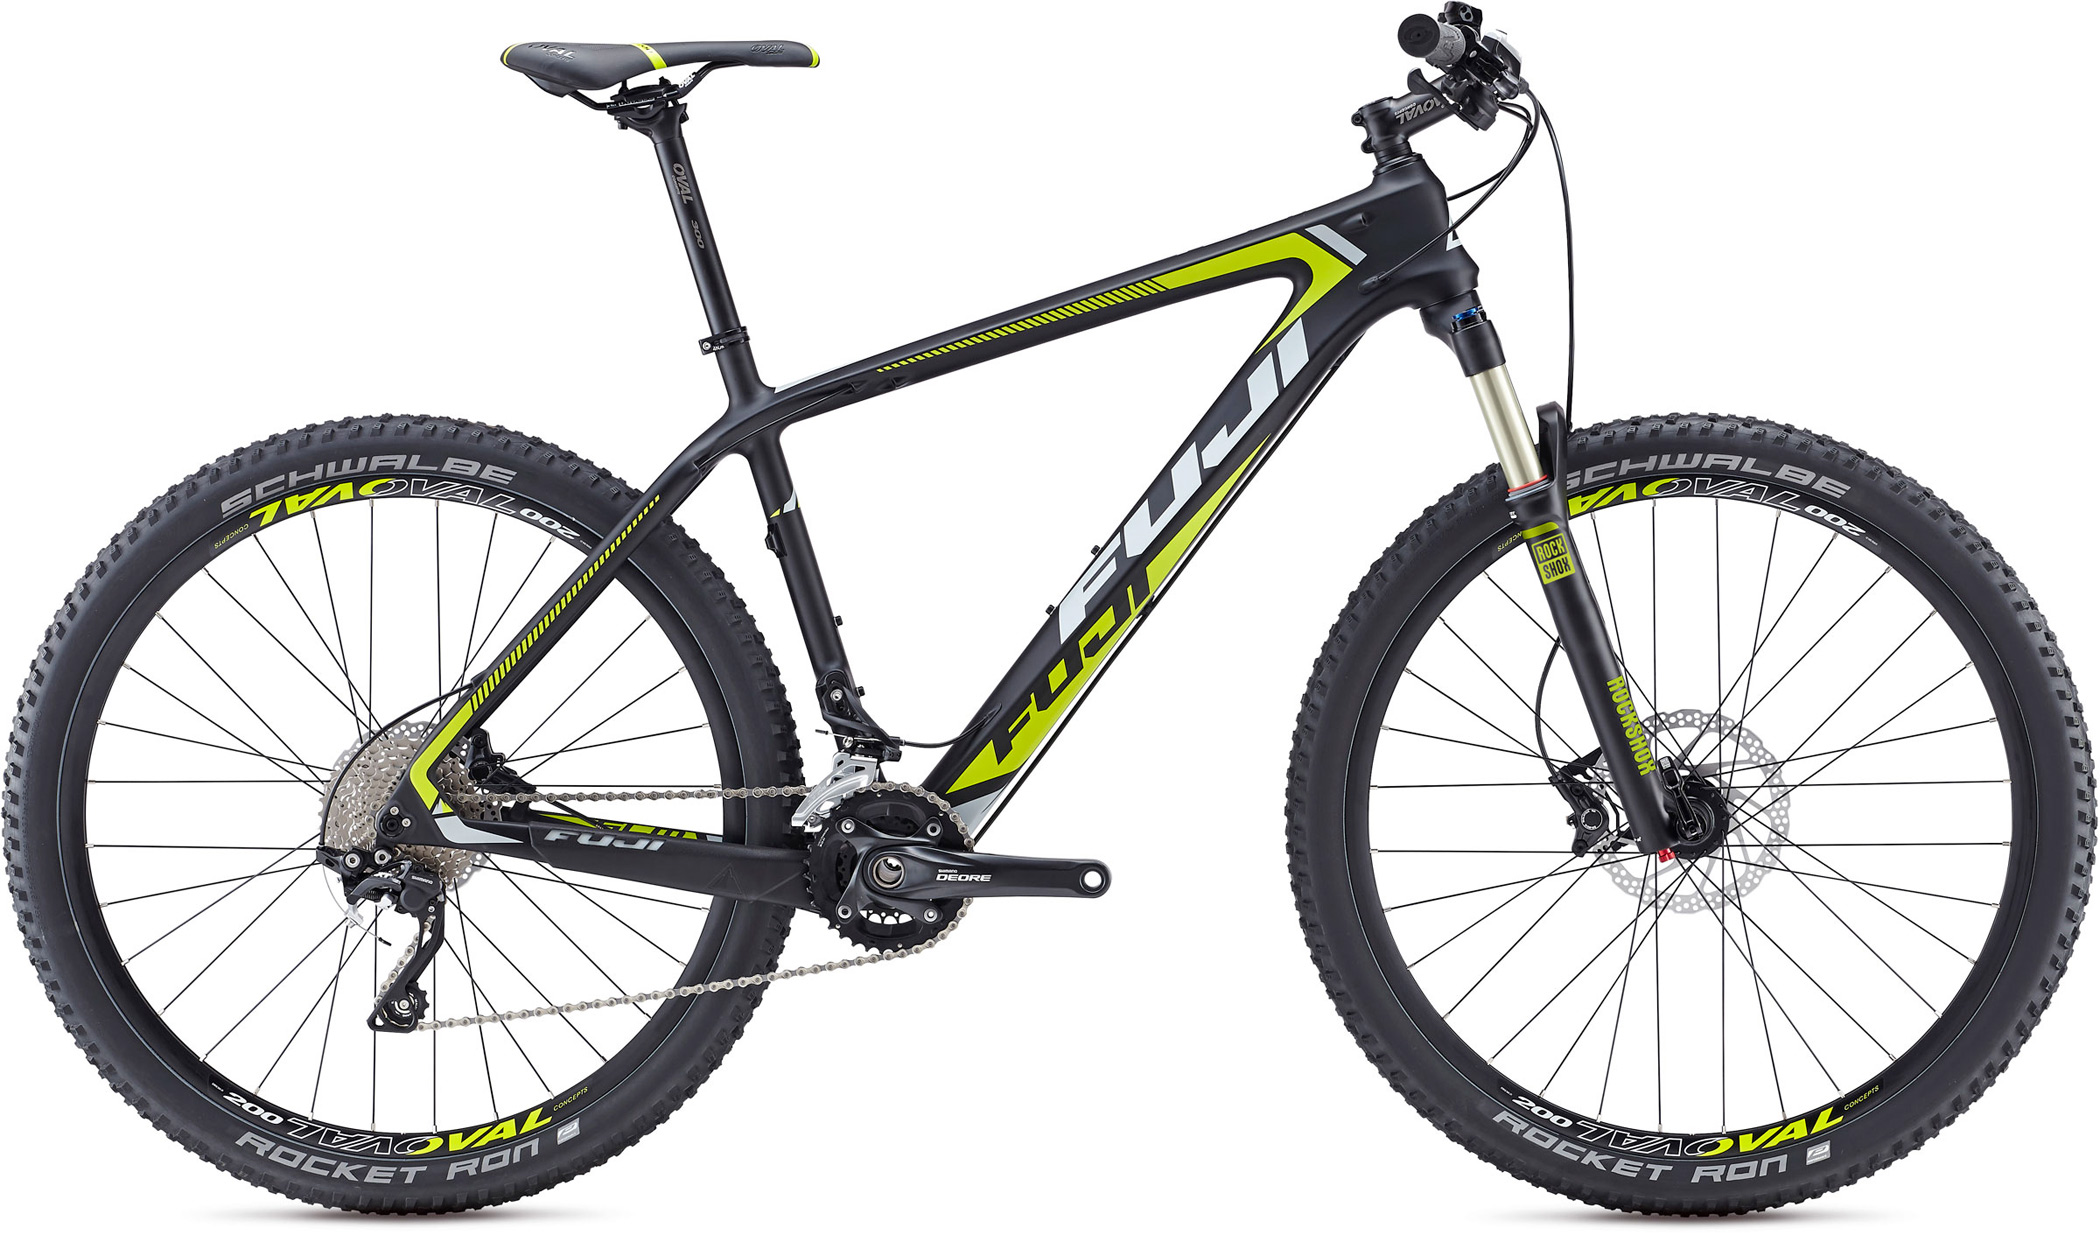 Save up to 60% off Mountain Bikes - MTB - New Carbon Fuji SLM 2.5 / 27.5 27.5 Carbon Mountain Bikes with Shimano Deore / Drivetrains, Rockshox Lockout Suspension Forks